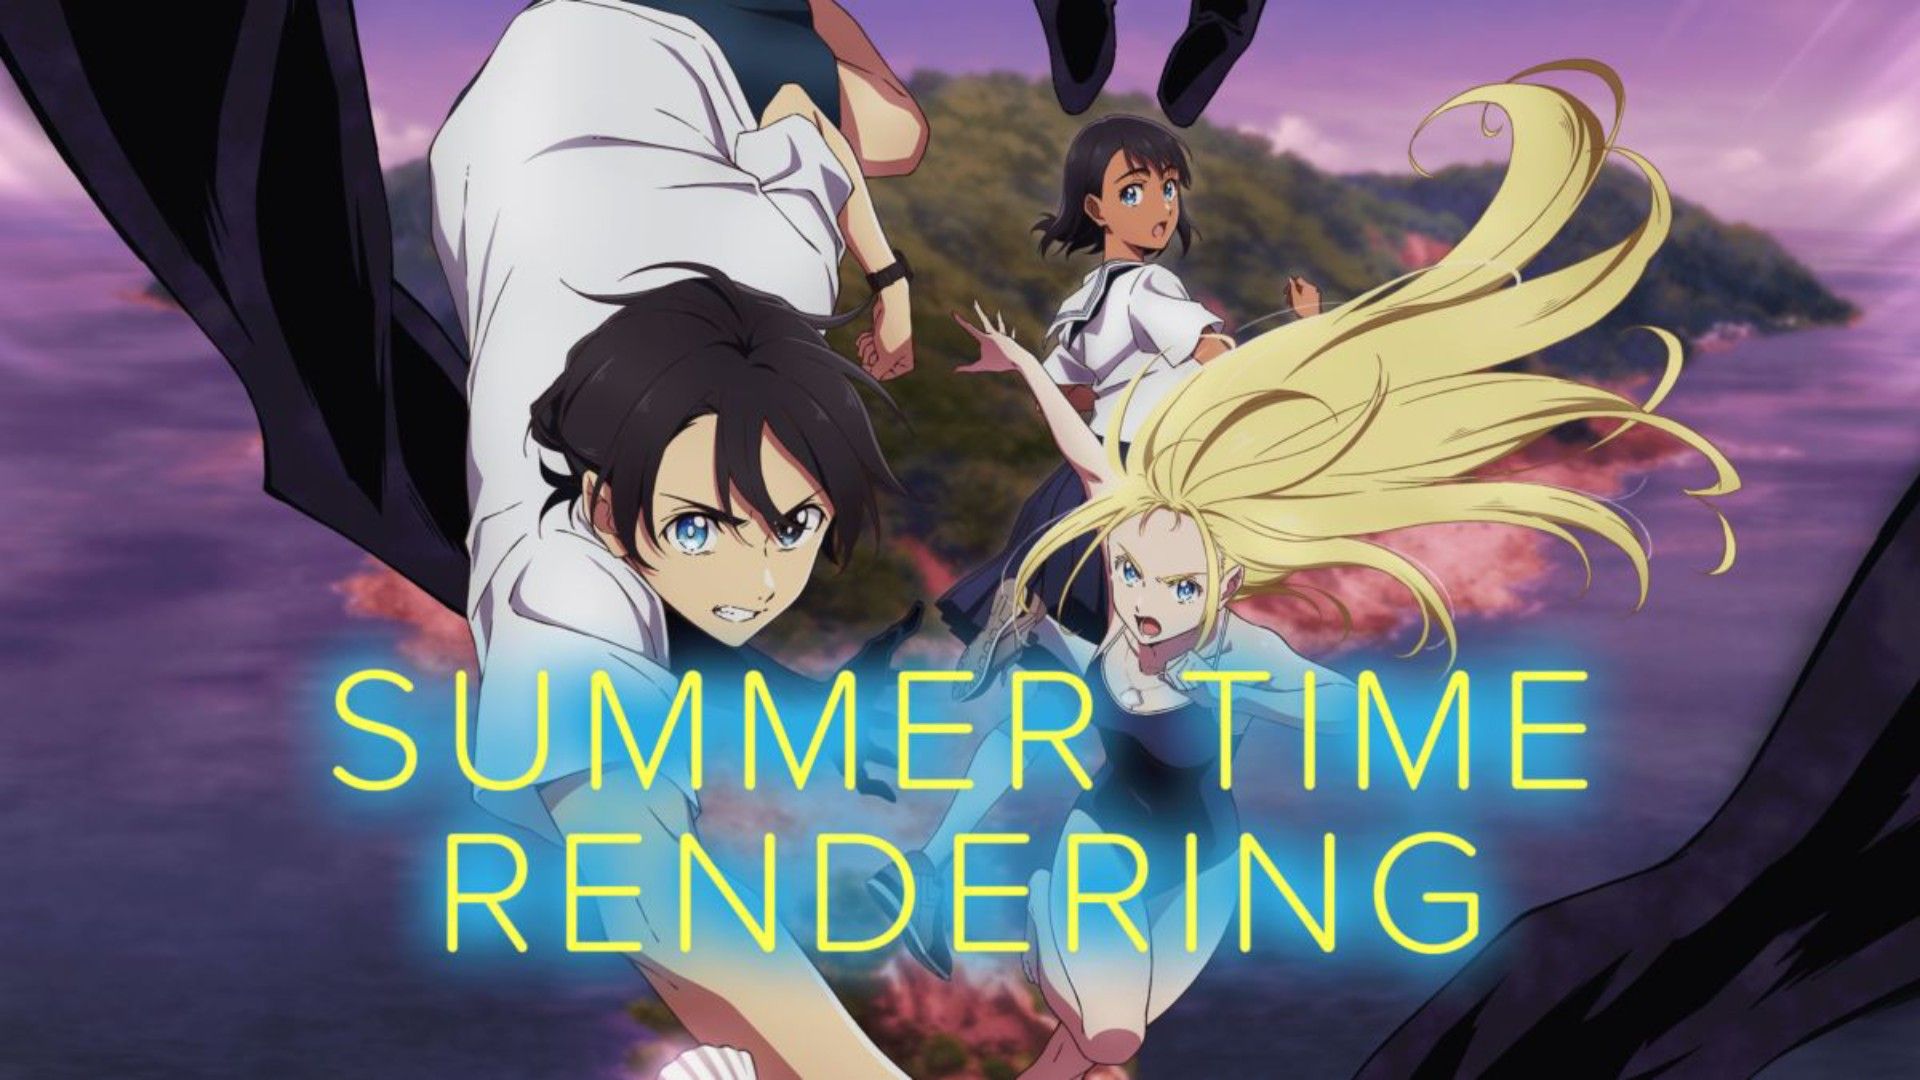 Summer Time Rendering' second cour trailer gives a glimpse into